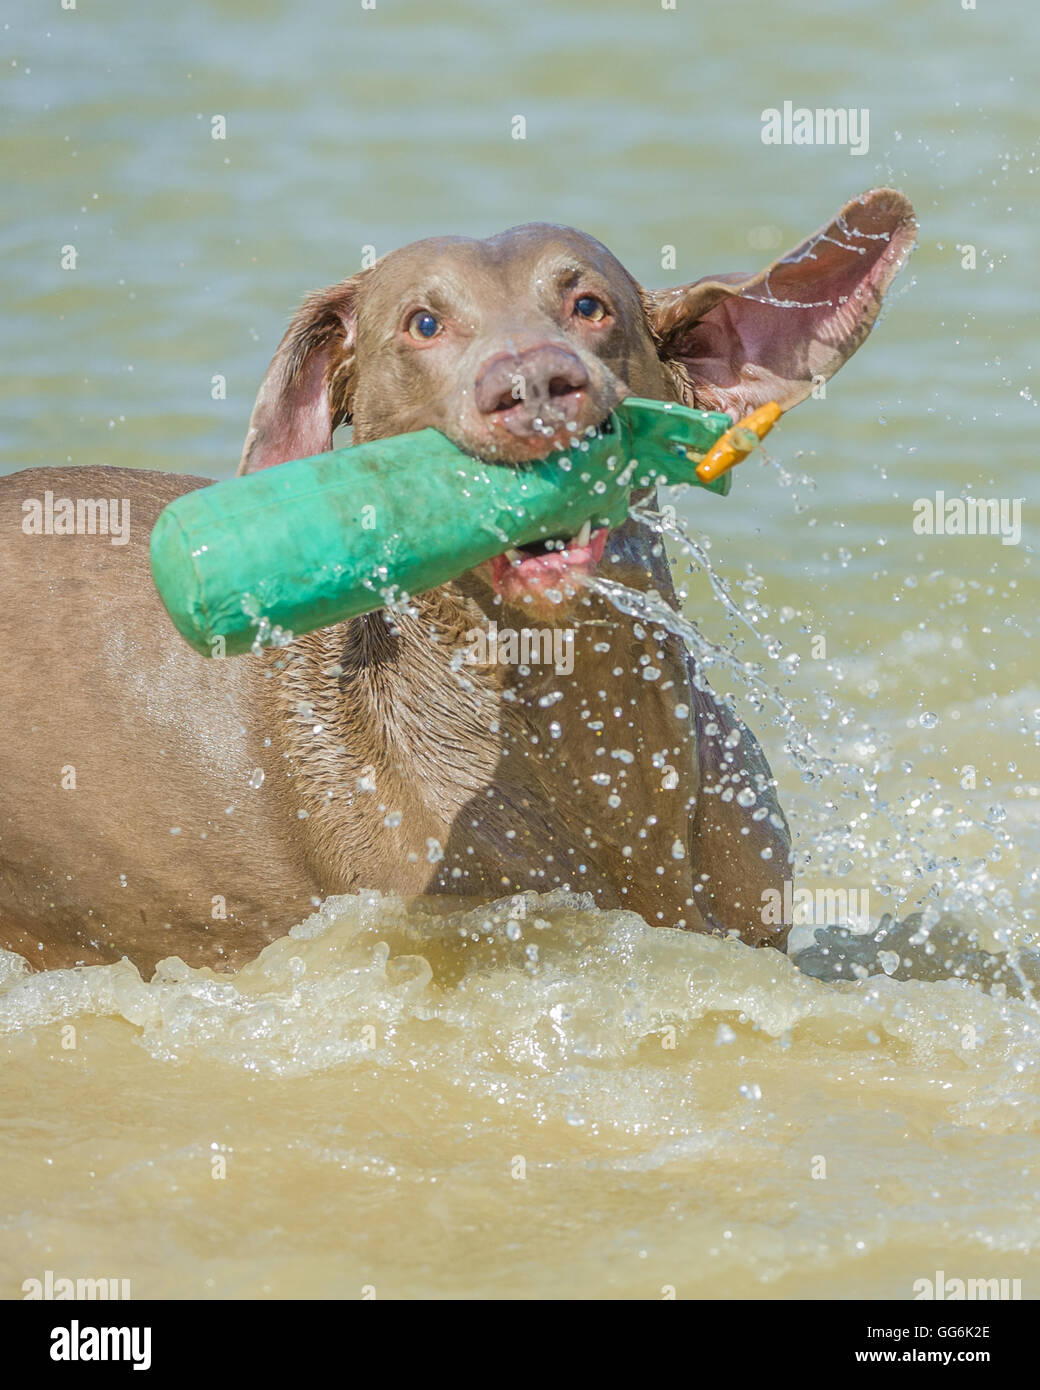 A Weimaraner dog swimming playing and splashing in water on a summers day with a training dummy Stock Photo